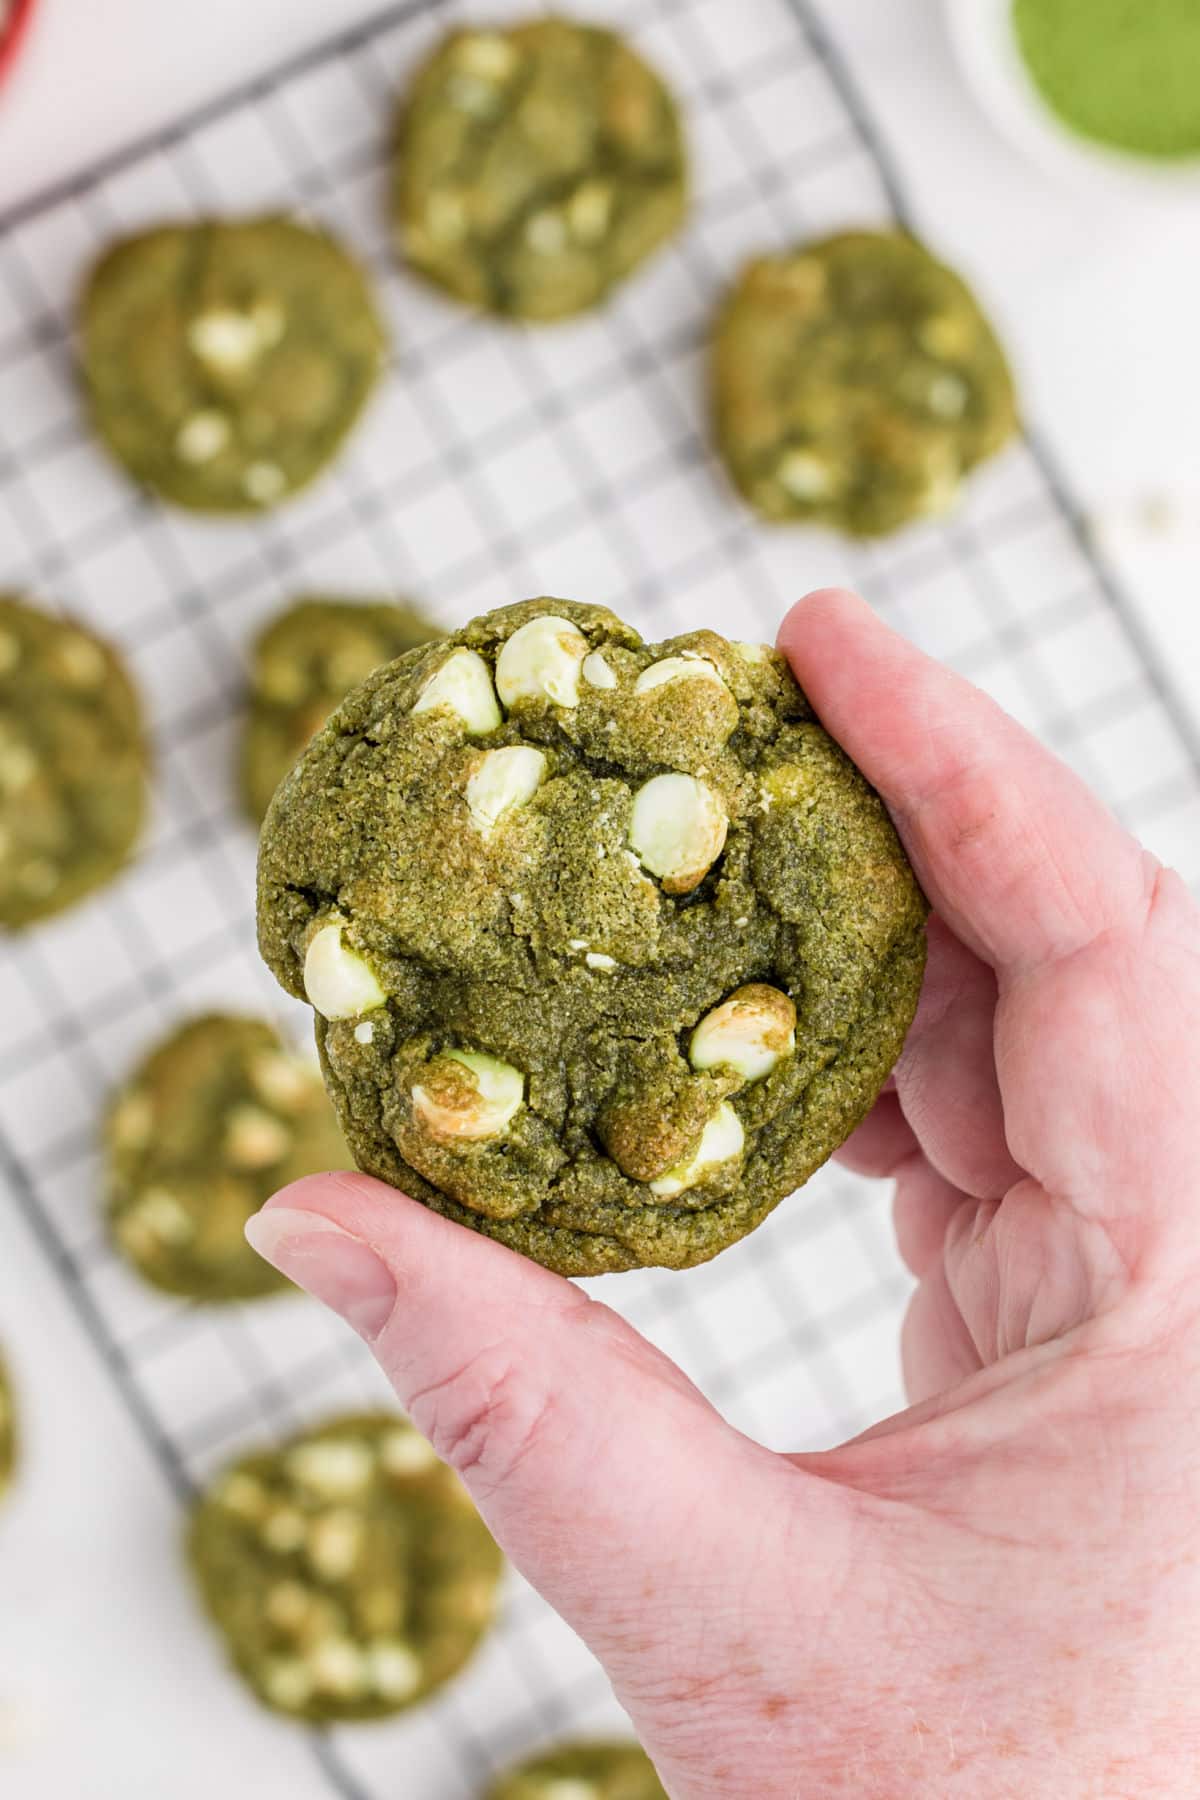 A hand holding up a matcha cookie.